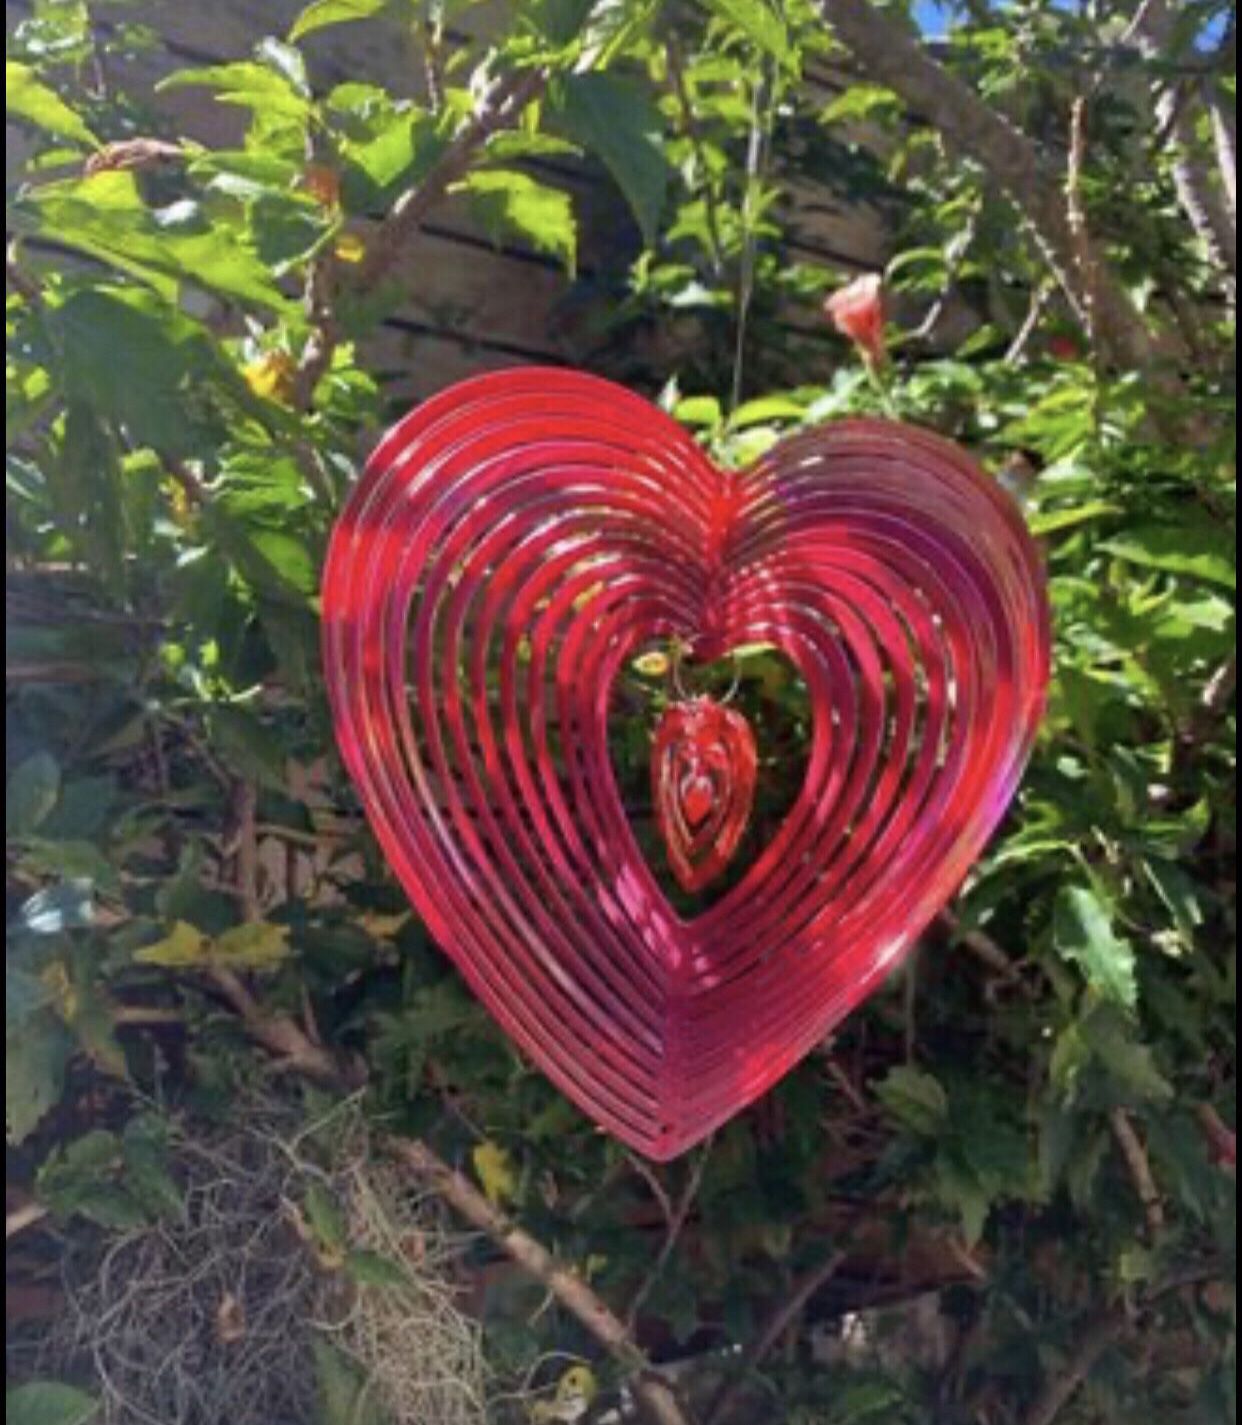 Spinning Red Heart For Outdoors Decor 